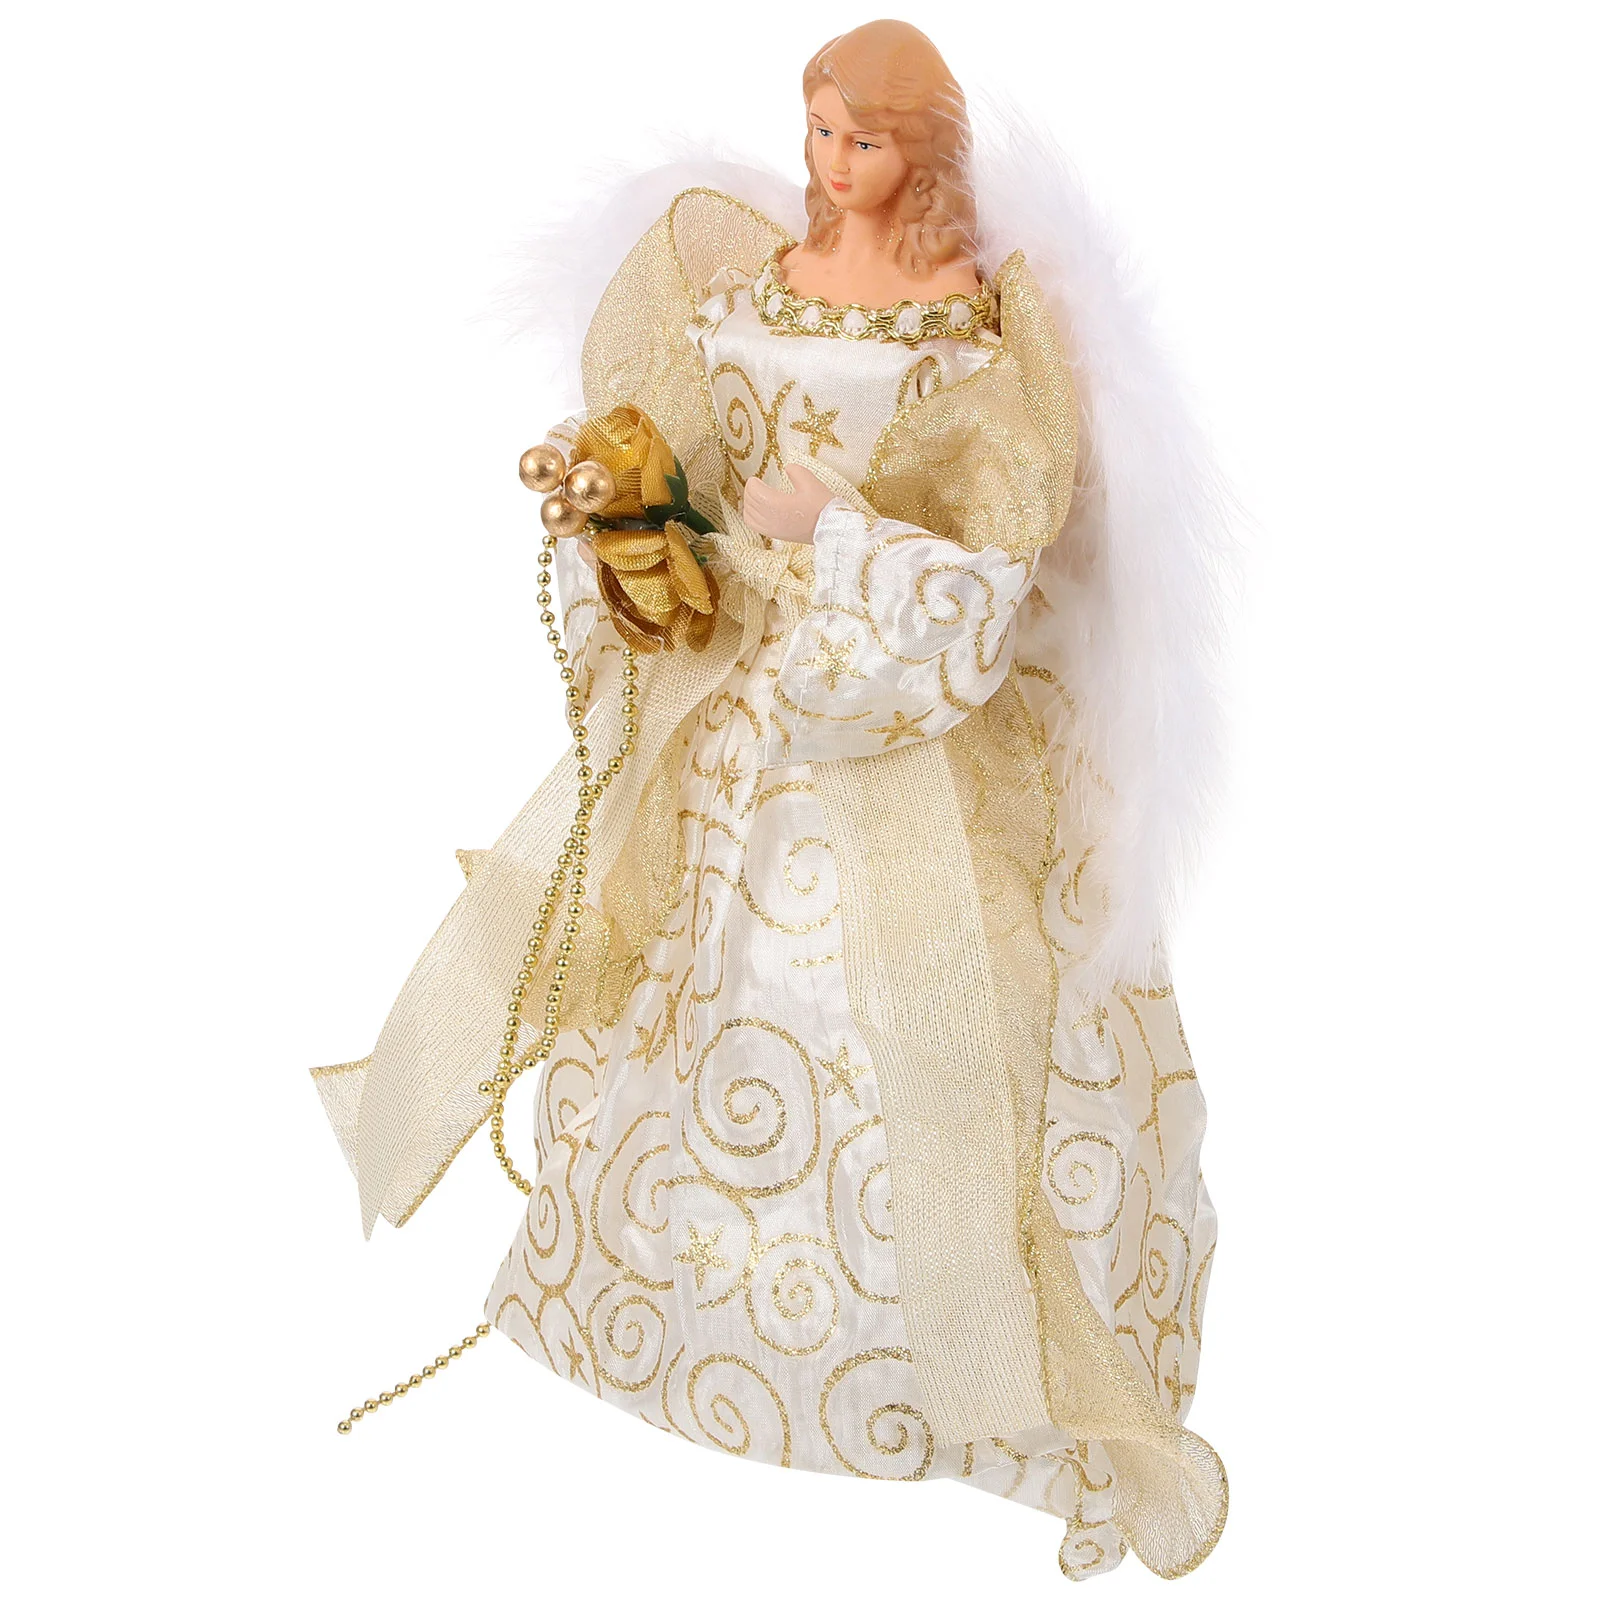 

Small Statue Wedding Christmas Tree Topper Decorative Items Home Angel Fabric Table